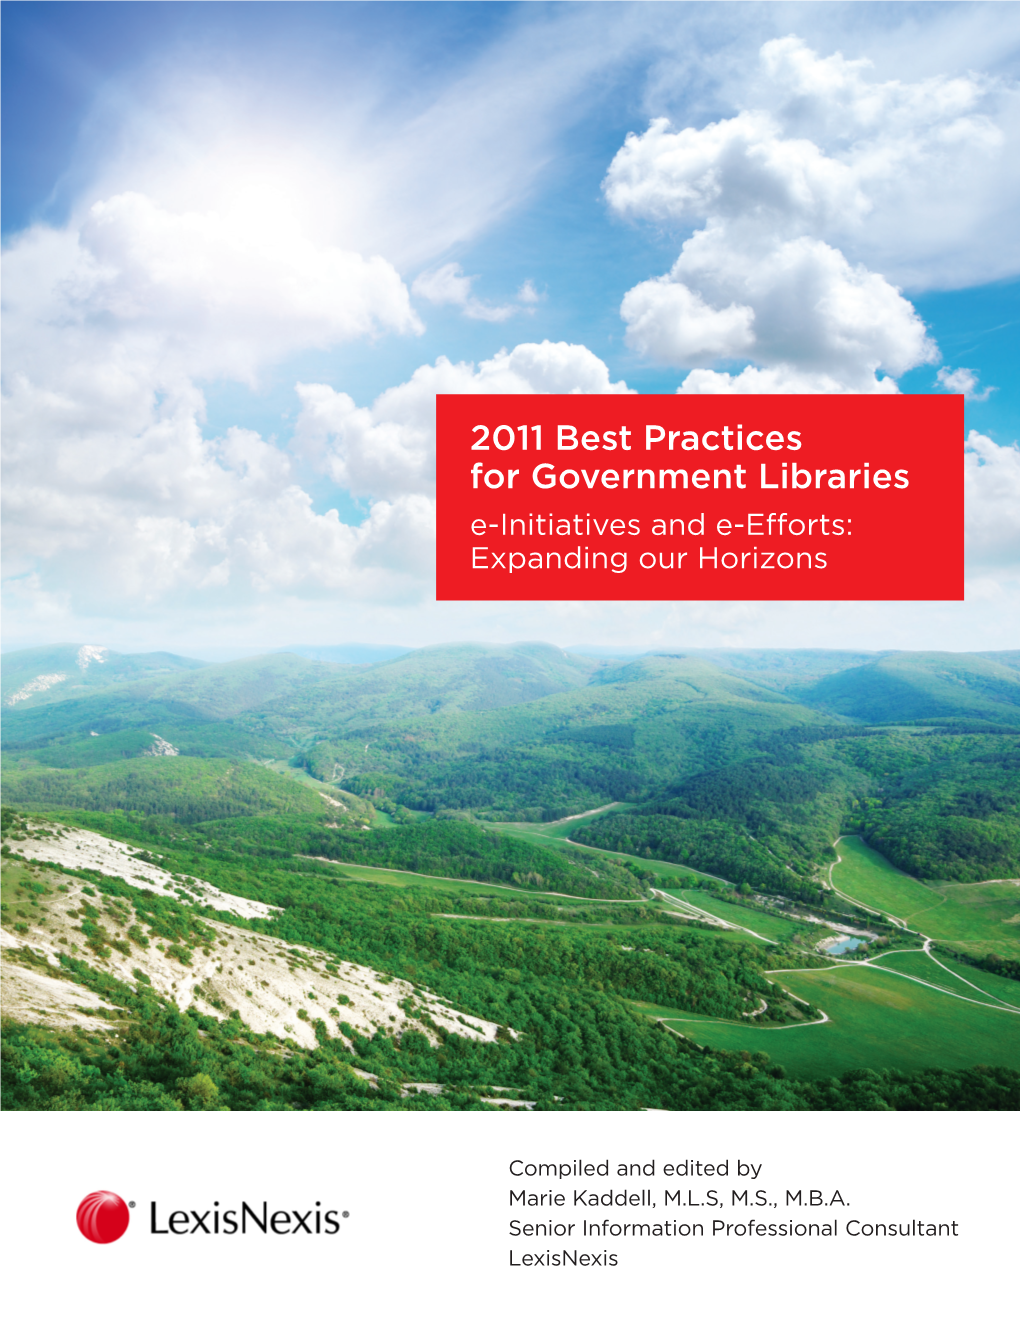 2011 Best Practices for Government Libraries E-Initiatives and E-Efforts: Expanding Our Horizons